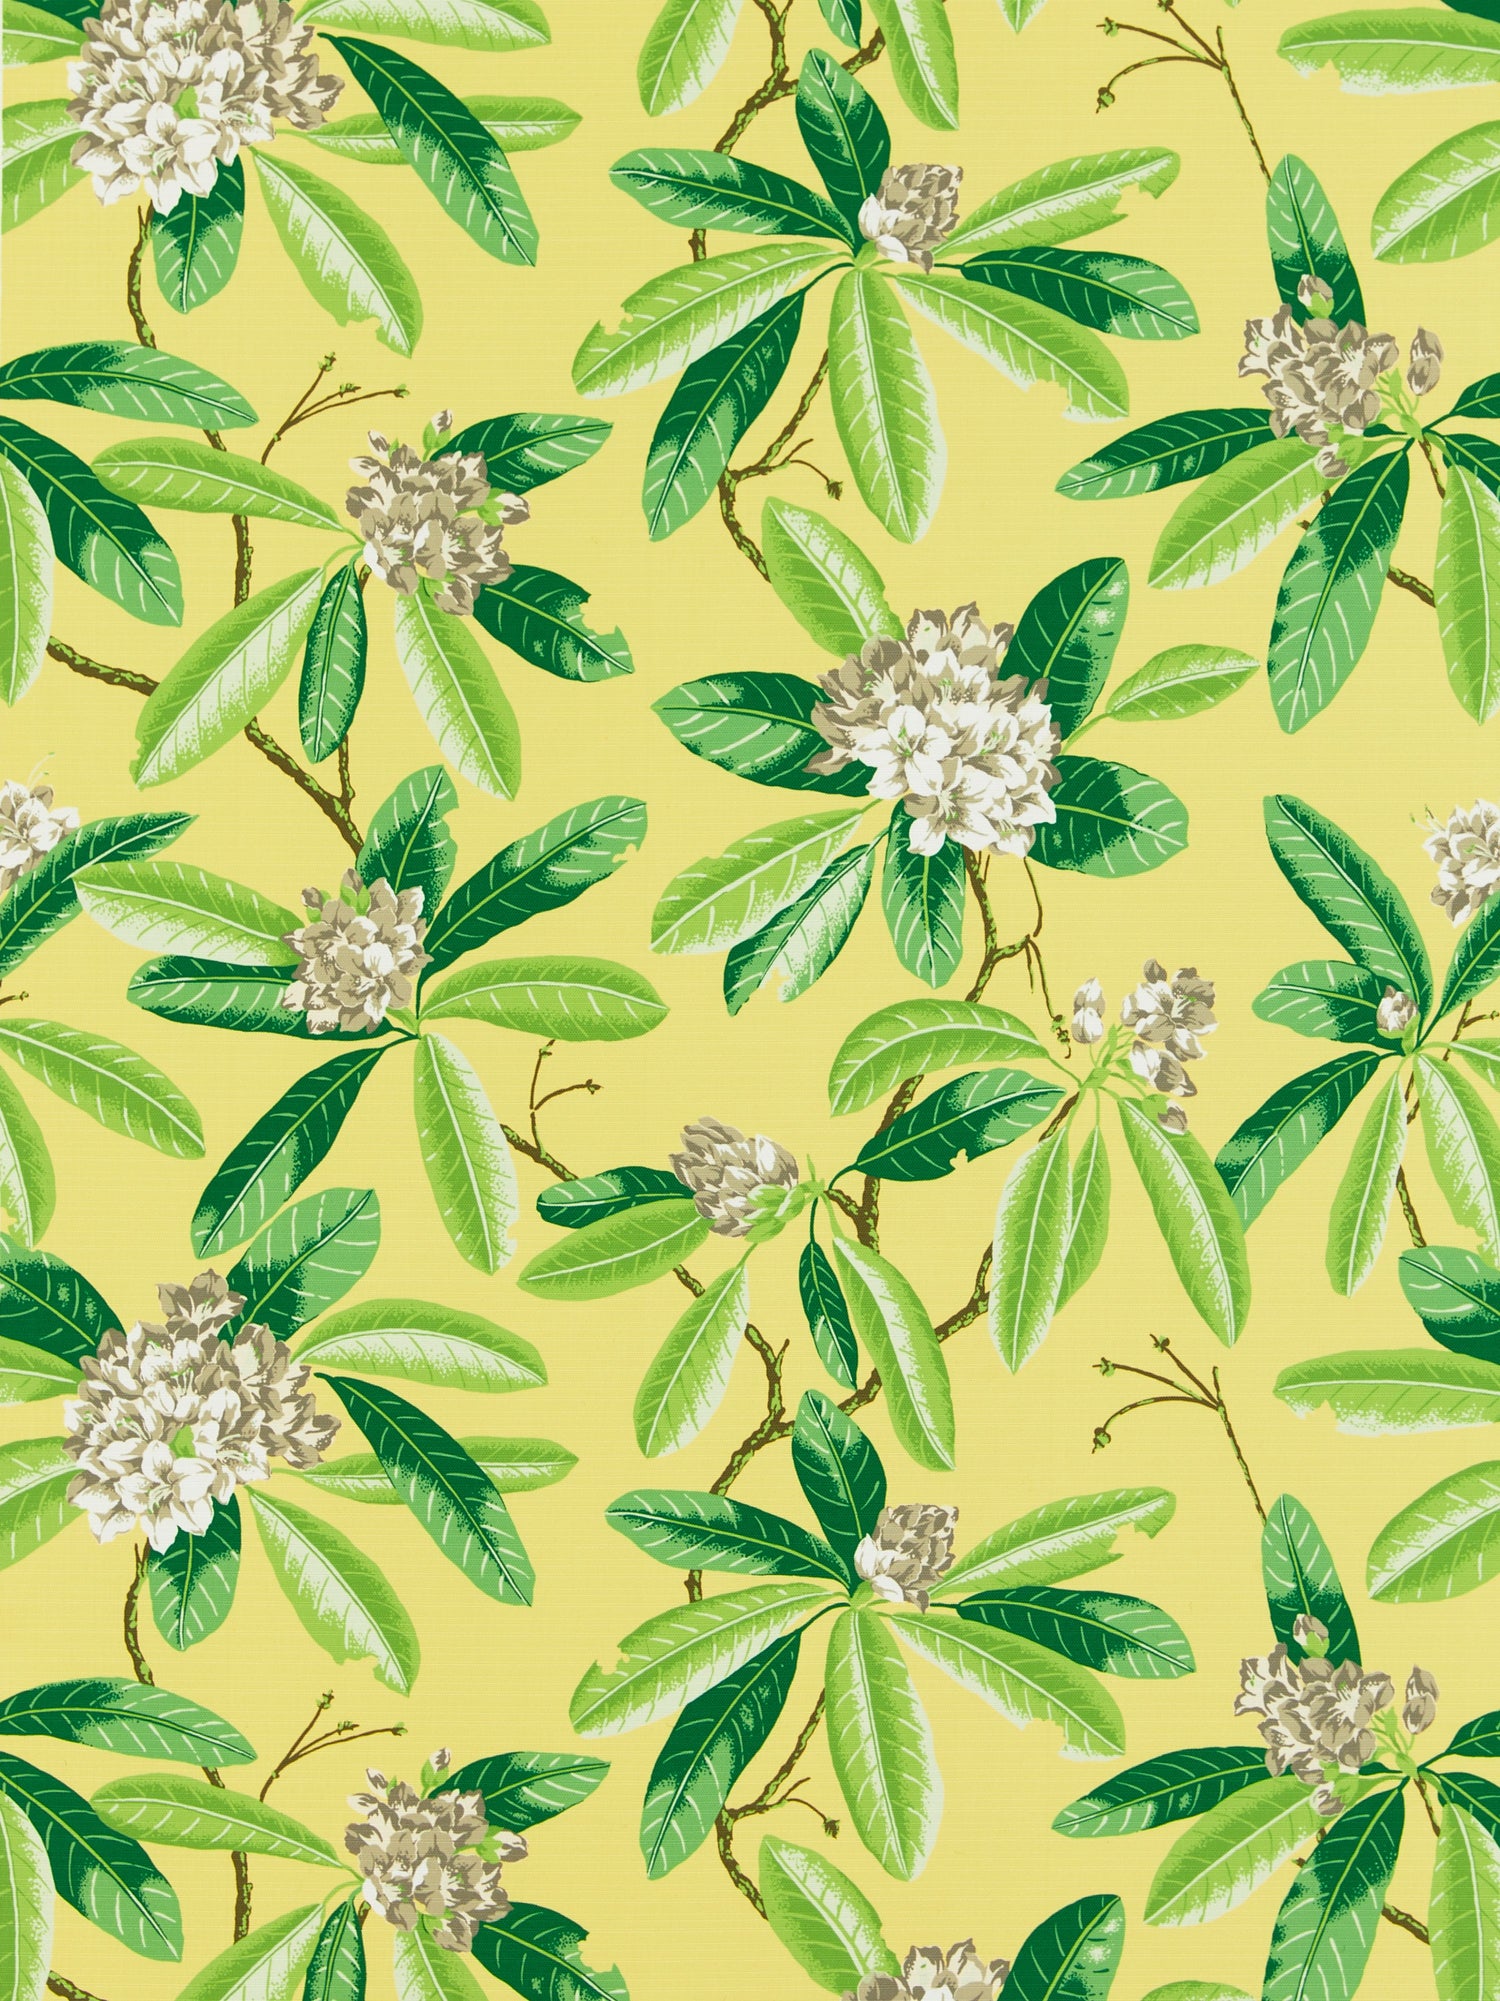 Rhododendron Outdoor fabric in pineapple color - pattern number SC 000216454M - by Scalamandre in the Scalamandre Fabrics Book 1 collection